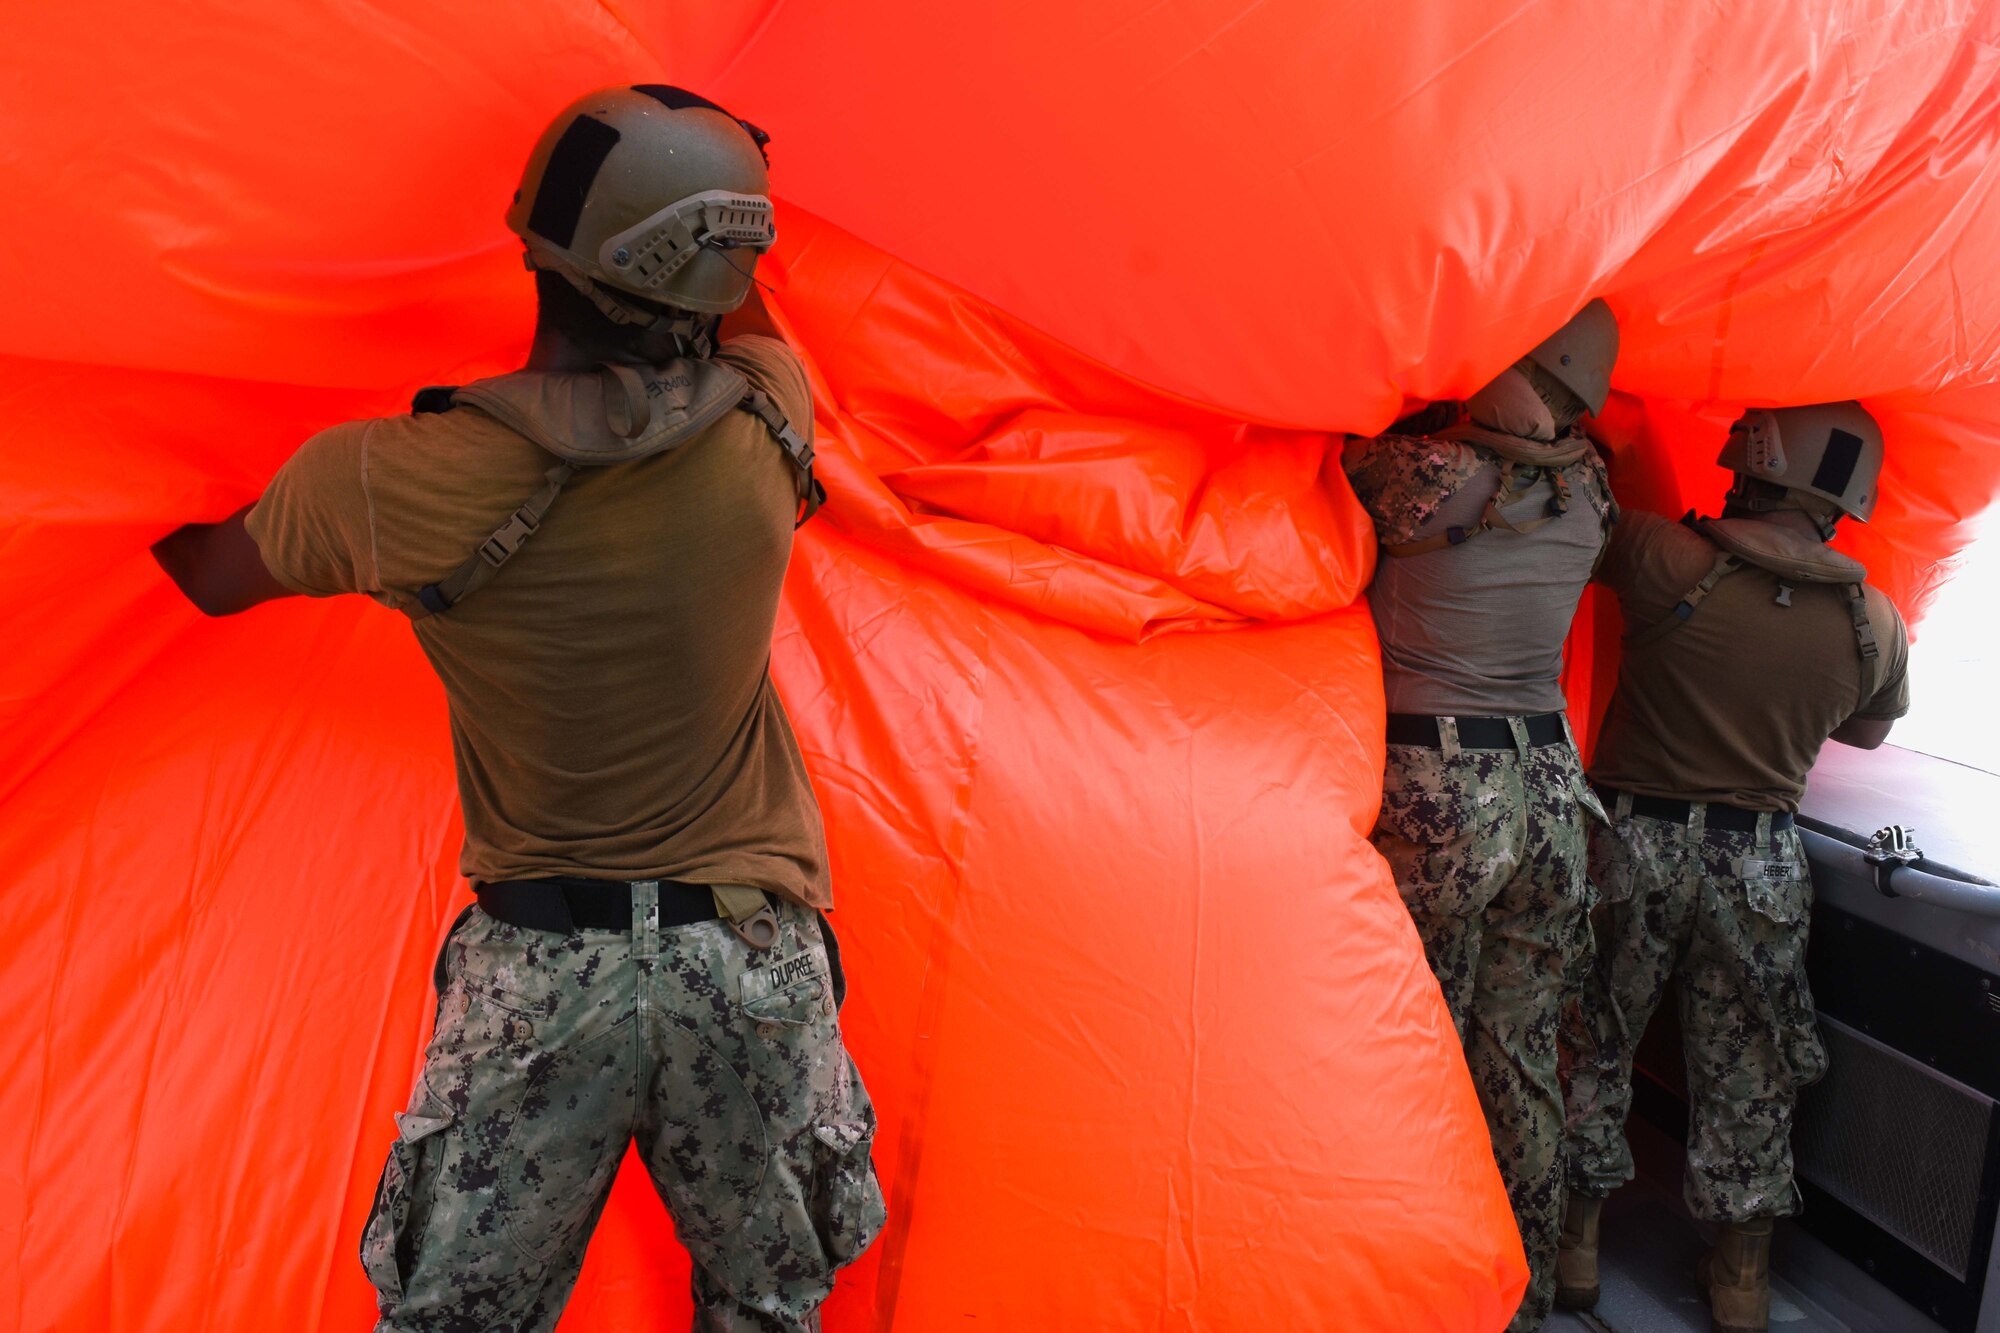 Sailors assigned to Commander, Task Force (CTF) 56, cast an inflatable target off a Mark VI patrol craft during an air operations in support of maritime surface warfare exercise with United Arab Emirates Joint Aviation Command forces in the Arabian Gulf Aug. 11, 2020. Integration operations between UAE and U.S. maritime forces are regularly held to maintain interoperability and the capability to counter threats posed in the maritime domain, ensuring freedom of navigation and free flow of commerce throughout the region’s heavily trafficked waterways. (U.S. Army photo by Staff Sgt. Timothy Clegg)